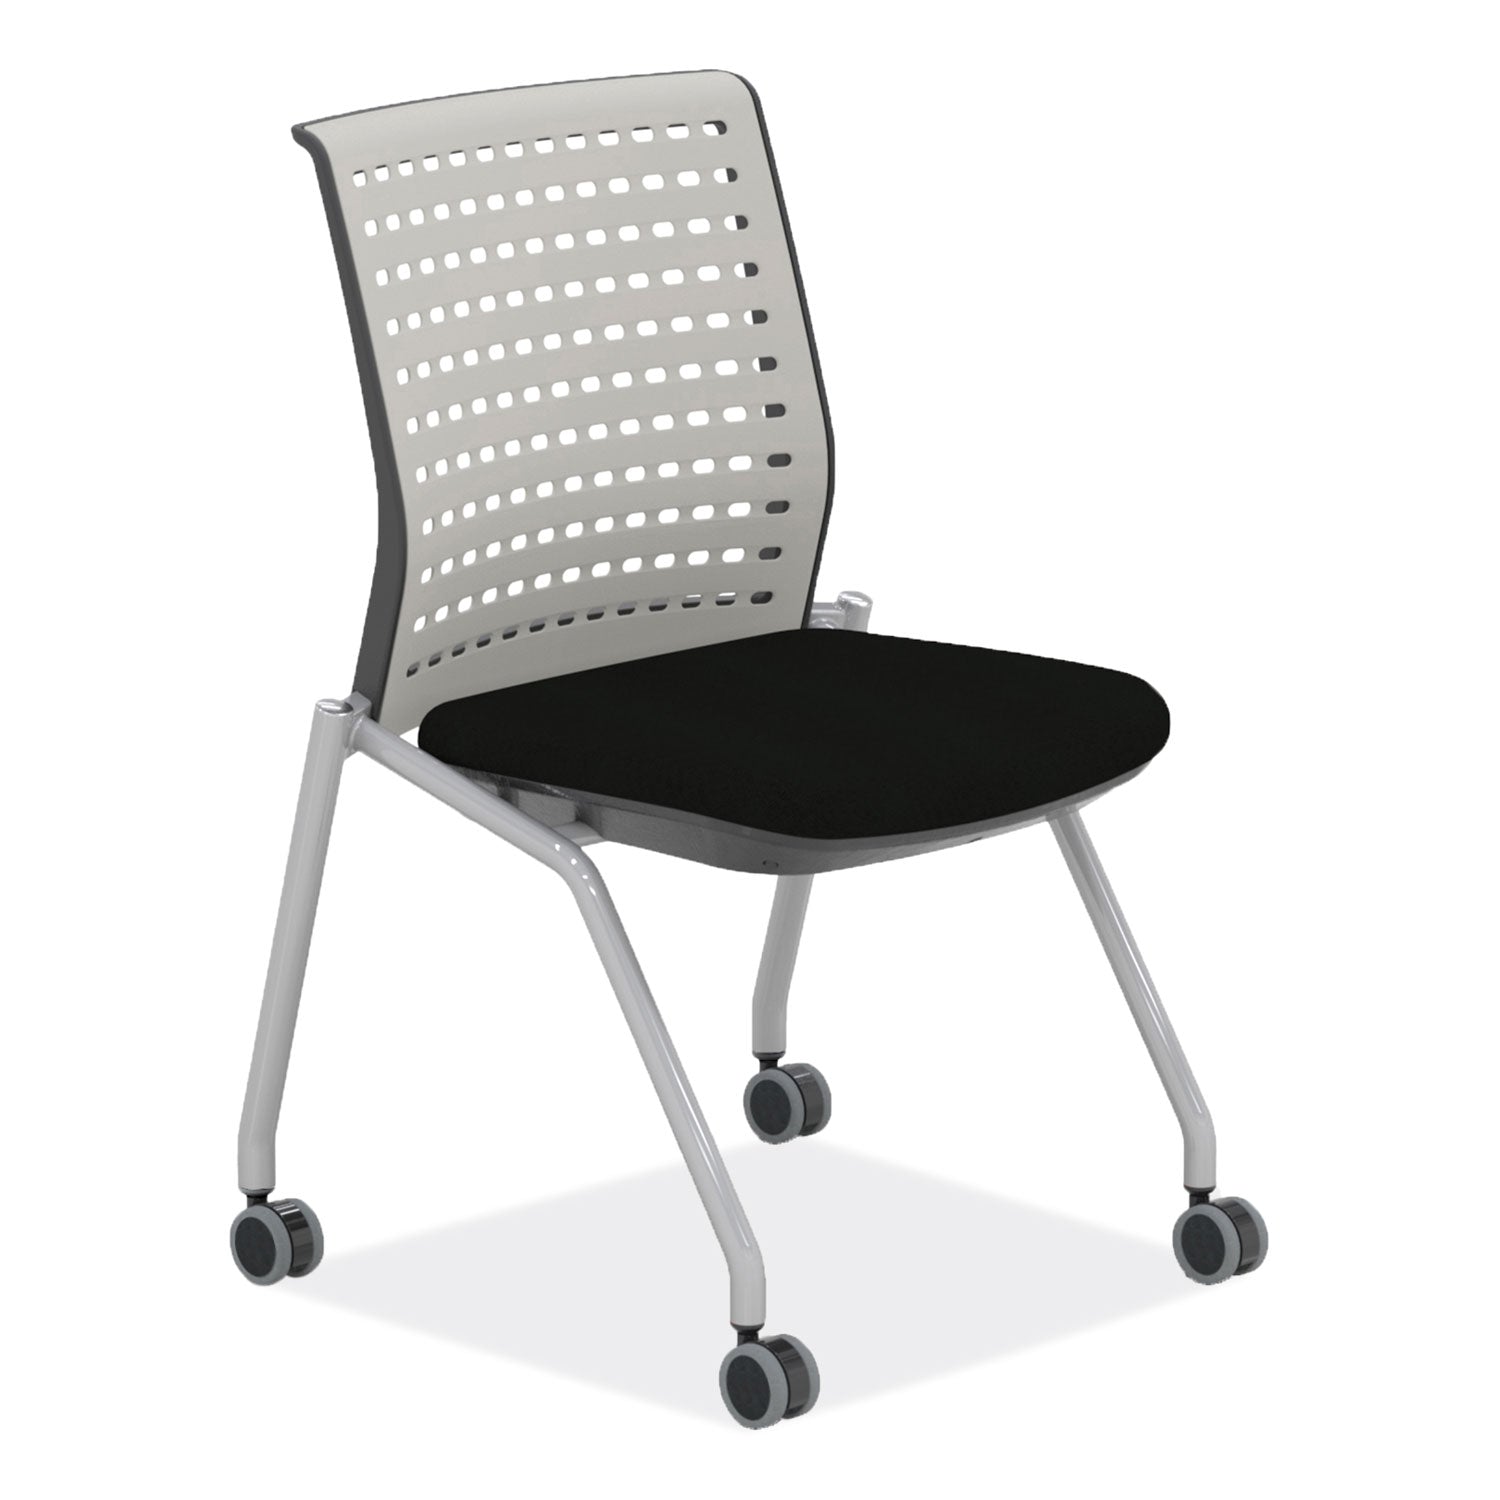 thesis-training-chair-w-static-back-max-250-lb-18-high-black-seat-gray-back-base-2-carton-ships-in-1-3-business-days_safkts2sgblk - 1